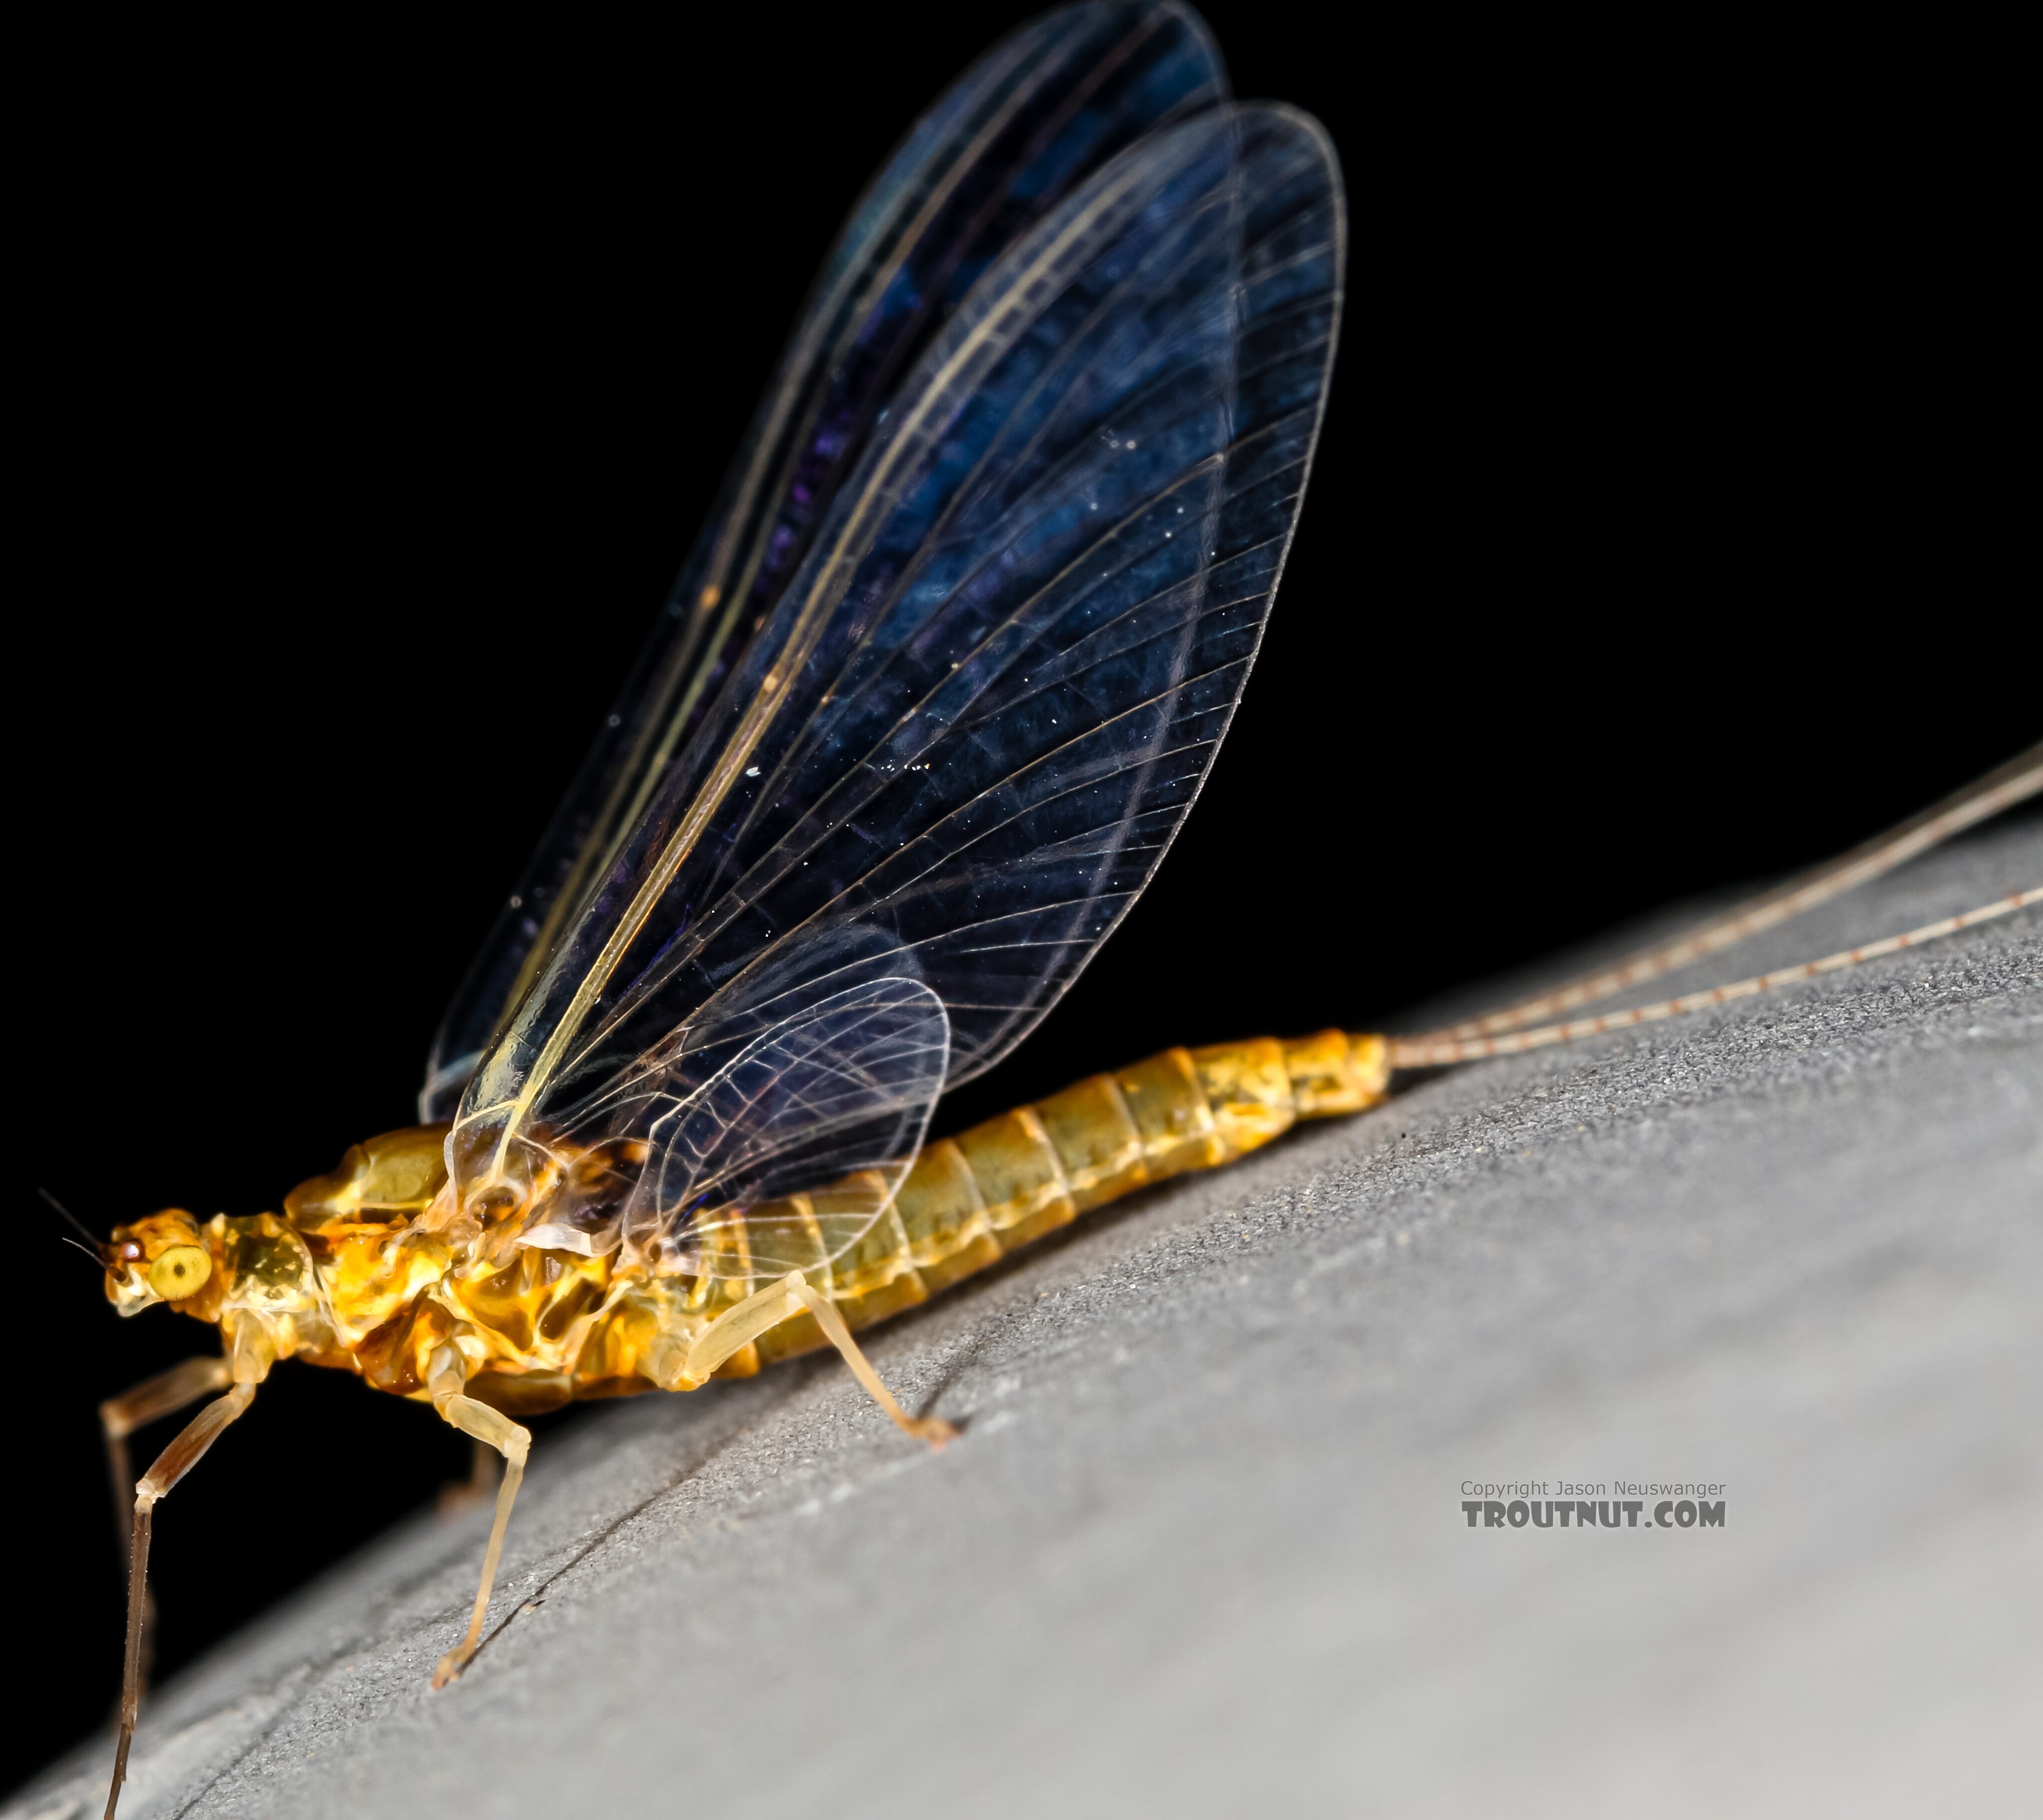 Female Ephemerella excrucians (Pale Morning Dun) Mayfly Spinner from the Henry's Fork of the Snake River in Idaho